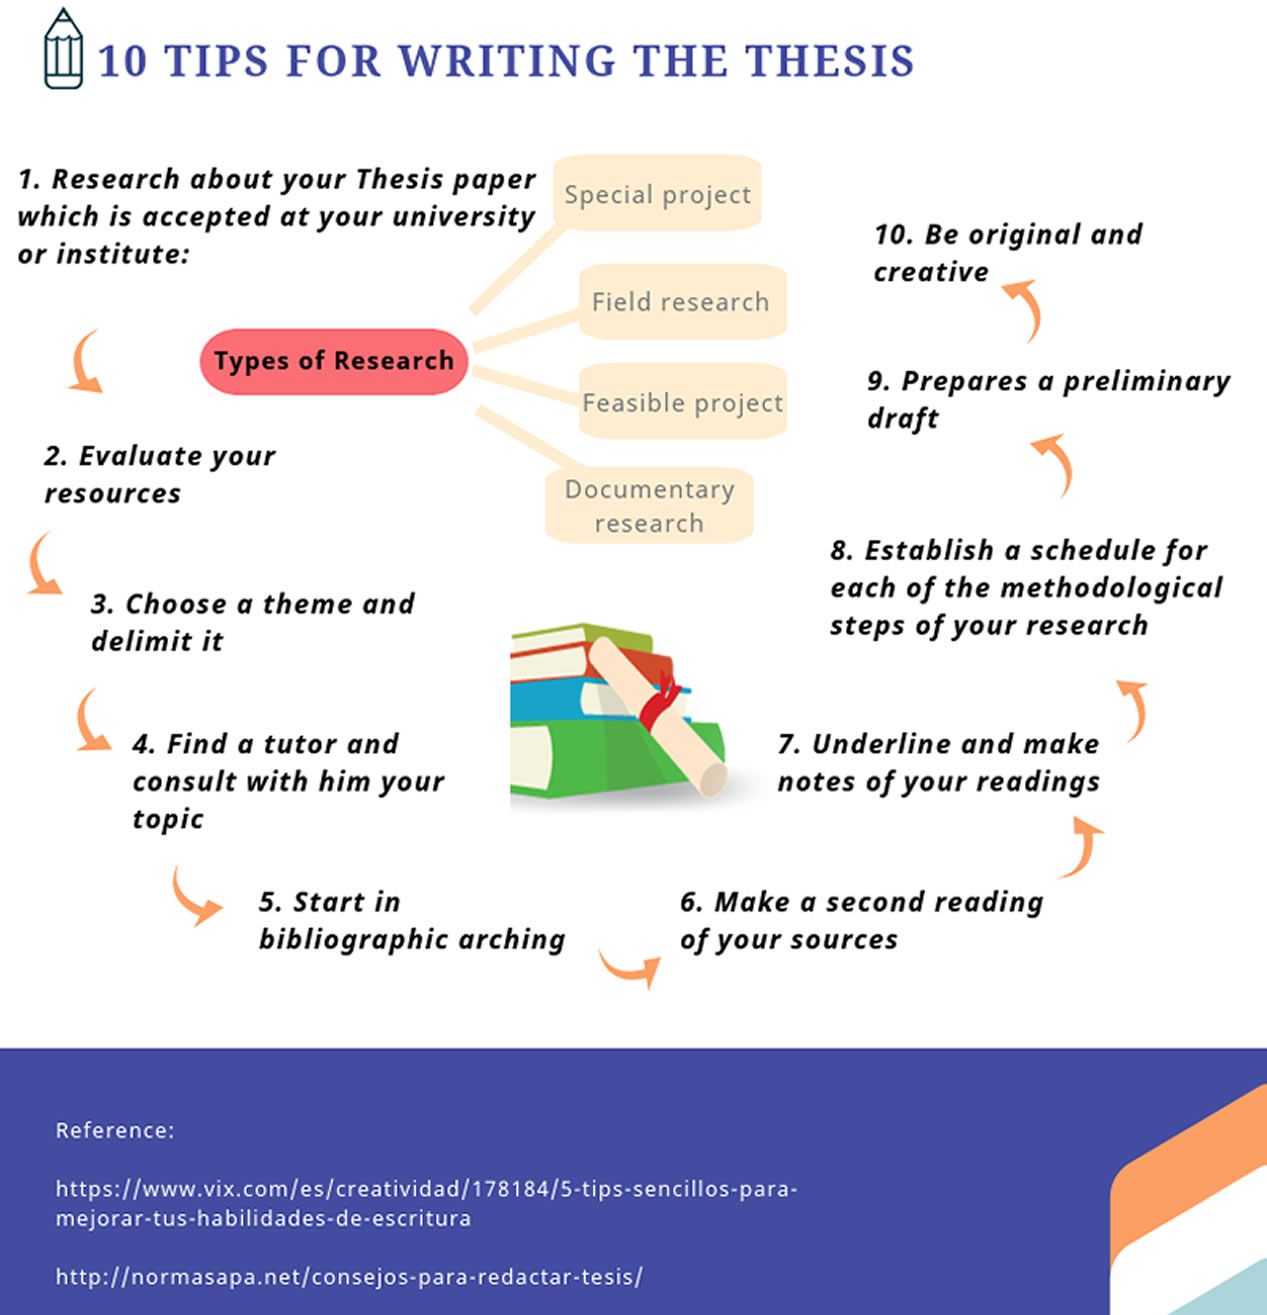 SEVEN TIPS TO WRITE A GOOD THESIS - tcb and associates